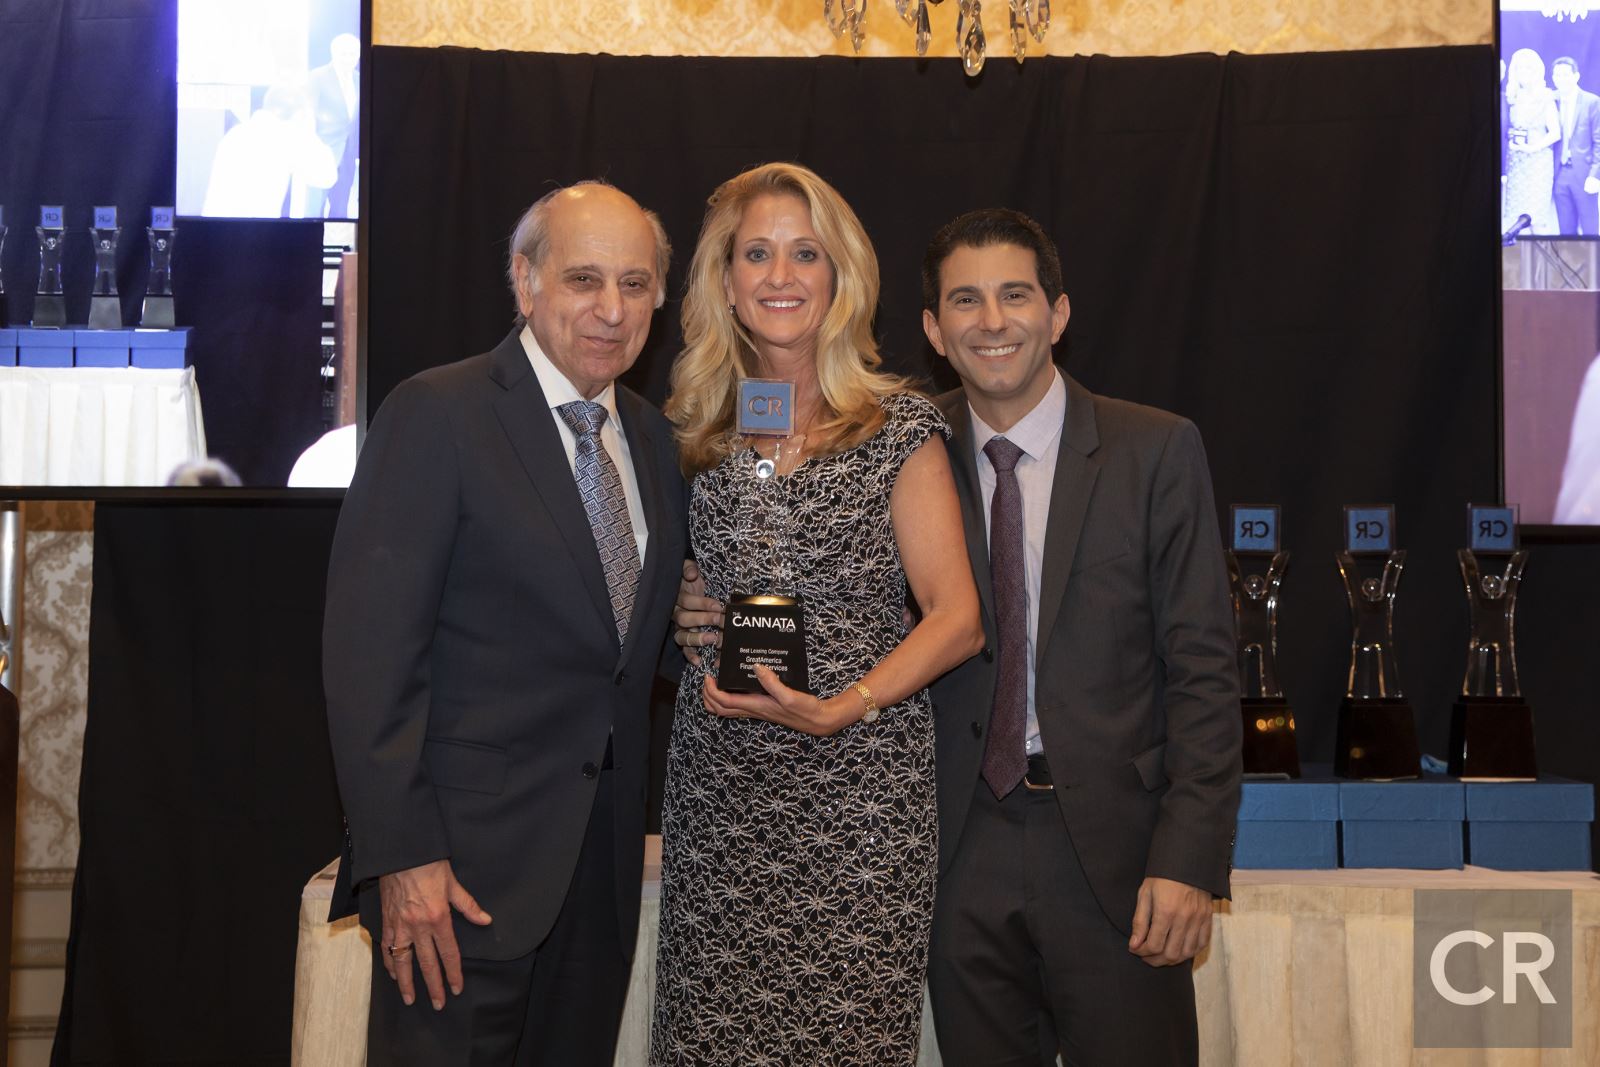 Jennie Fisher poses with Frank and CJ Cannata